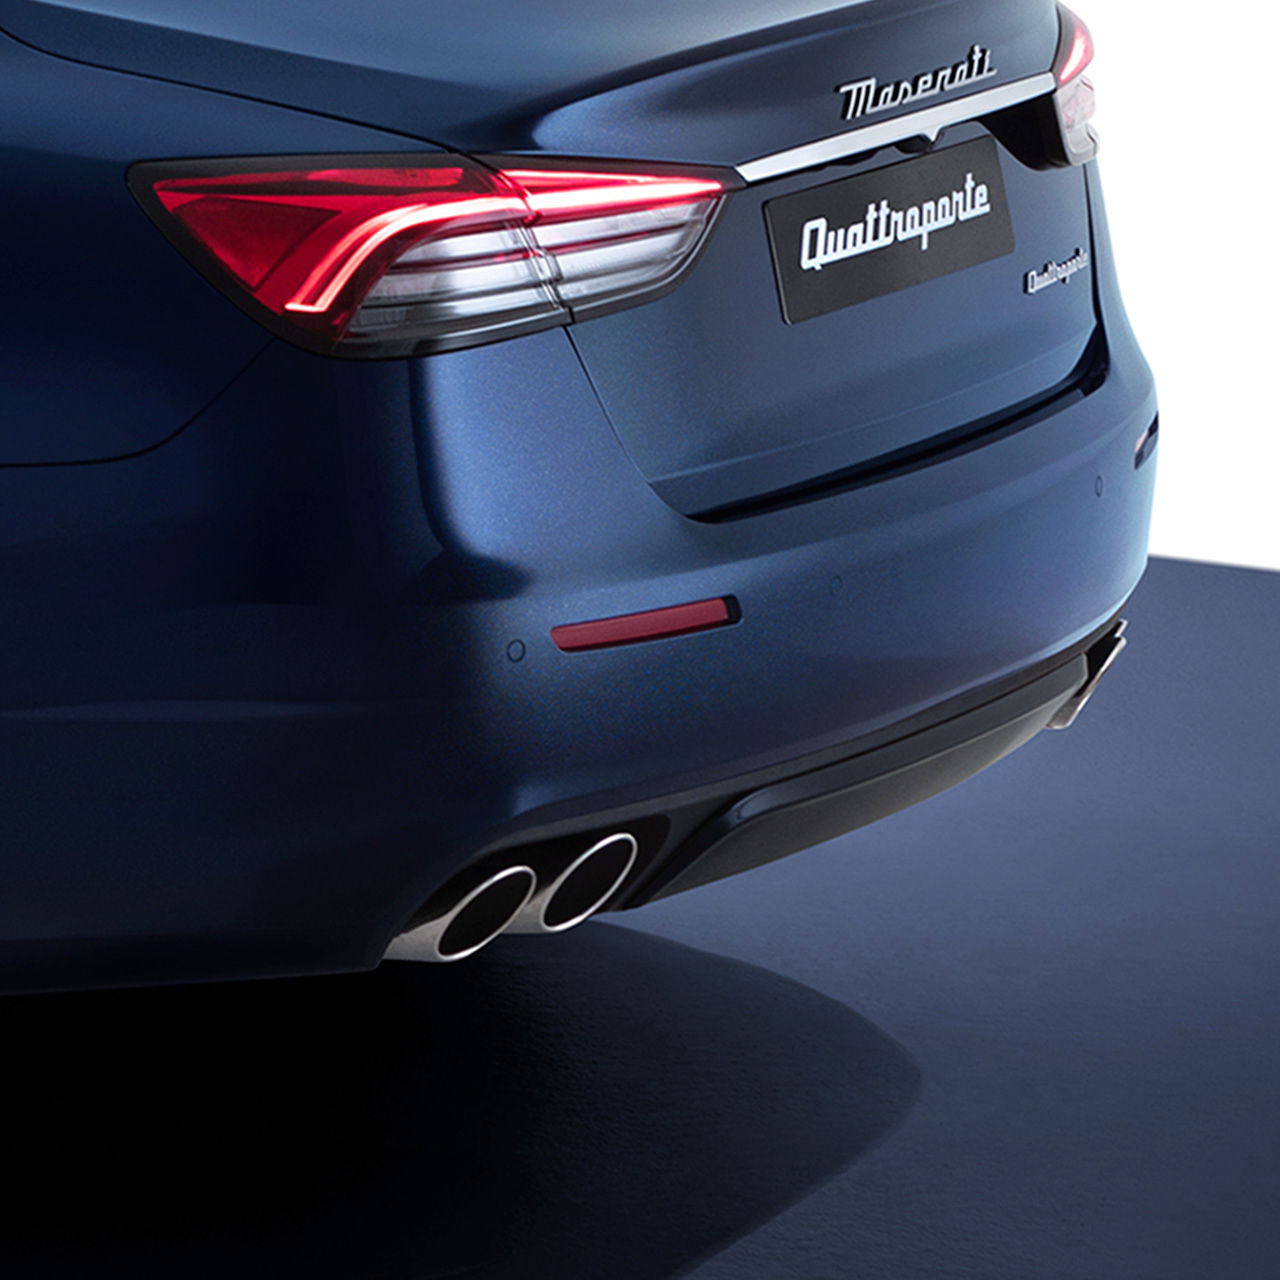 Tailgate and Exhaust details of Quattroporte 